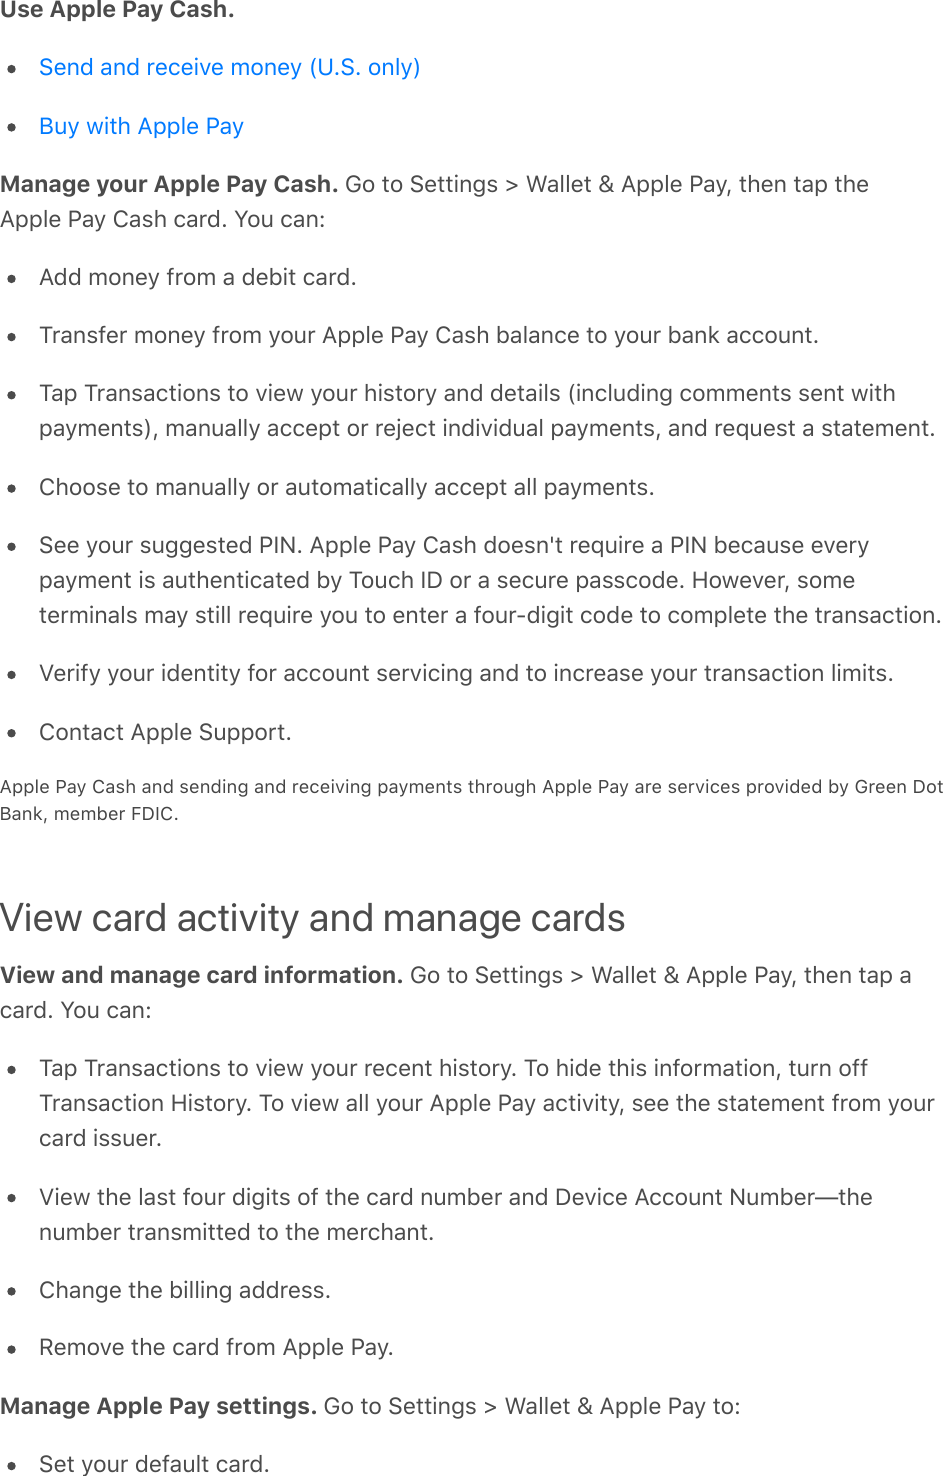 Use Apple Pay Cash.  Manage your Apple Pay Cash. Go to Settings &gt; Wallet &amp; Apple Pay, then tap theApple Pay Cash card. You can:Add money from a debit card.Transfer money from your Apple Pay Cash balance to your bank account.Tap Transactions to view your history and details (including comments sent withpayments), manually accept or reject individual payments, and request a statement.Choose to manually or automatically accept all payments.See your suggested PIN. Apple Pay Cash doesn&apos;t require a PIN because everypayment is authenticated by Touch ID or a secure passcode. However, someterminals may still require you to enter a four-digit code to complete the transaction.Verify your identity for account servicing and to increase your transaction limits.Contact Apple Support.Apple Pay Cash and sending and receiving payments through Apple Pay are services provided by Green DotBank, member FDIC.View card activity and manage cardsView and manage card information. Go to Settings &gt; Wallet &amp; Apple Pay, then tap acard. You can:Tap Transactions to view your recent history. To hide this information, turn offTransaction History. To view all your Apple Pay activity, see the statement from yourcard issuer.View the last four digits of the card number and Device Account Number—thenumber transmitted to the merchant.Change the billing address.Remove the card from Apple Pay.Manage Apple Pay settings. Go to Settings &gt; Wallet &amp; Apple Pay to:Set your default card.Send and receive money (U.S. only)Buy with Apple Pay